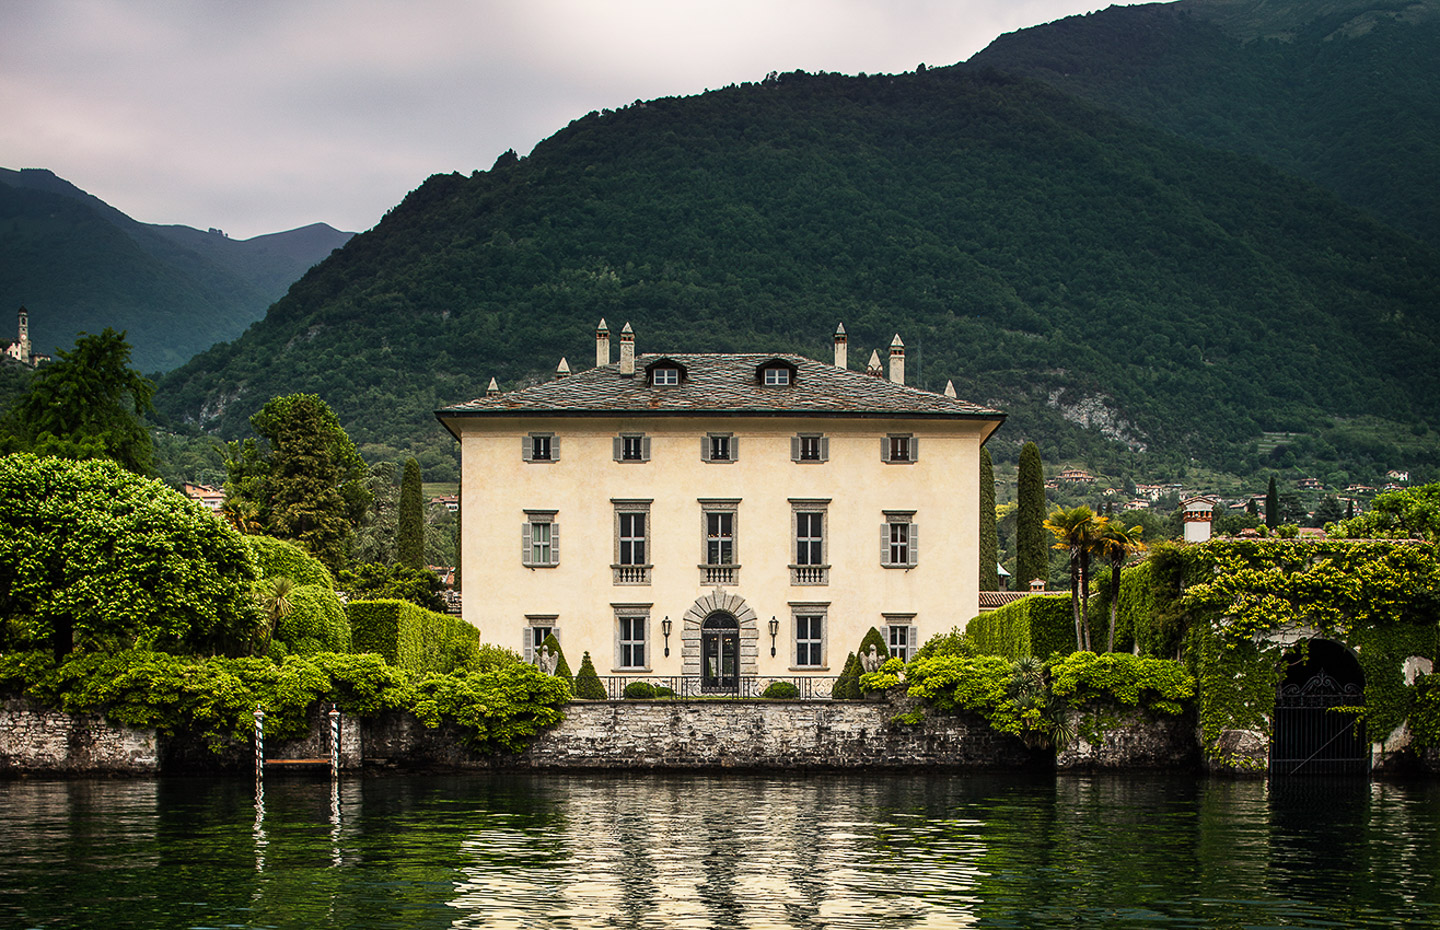 Villa-Balbiano-luxury-property-Lake-Como-Italy-the-heritage-collection-17-century-former-residence-cardinale-Durini-available-for-exclusive-events-accommodation-rent-rental-event-boat-access-service.jpg